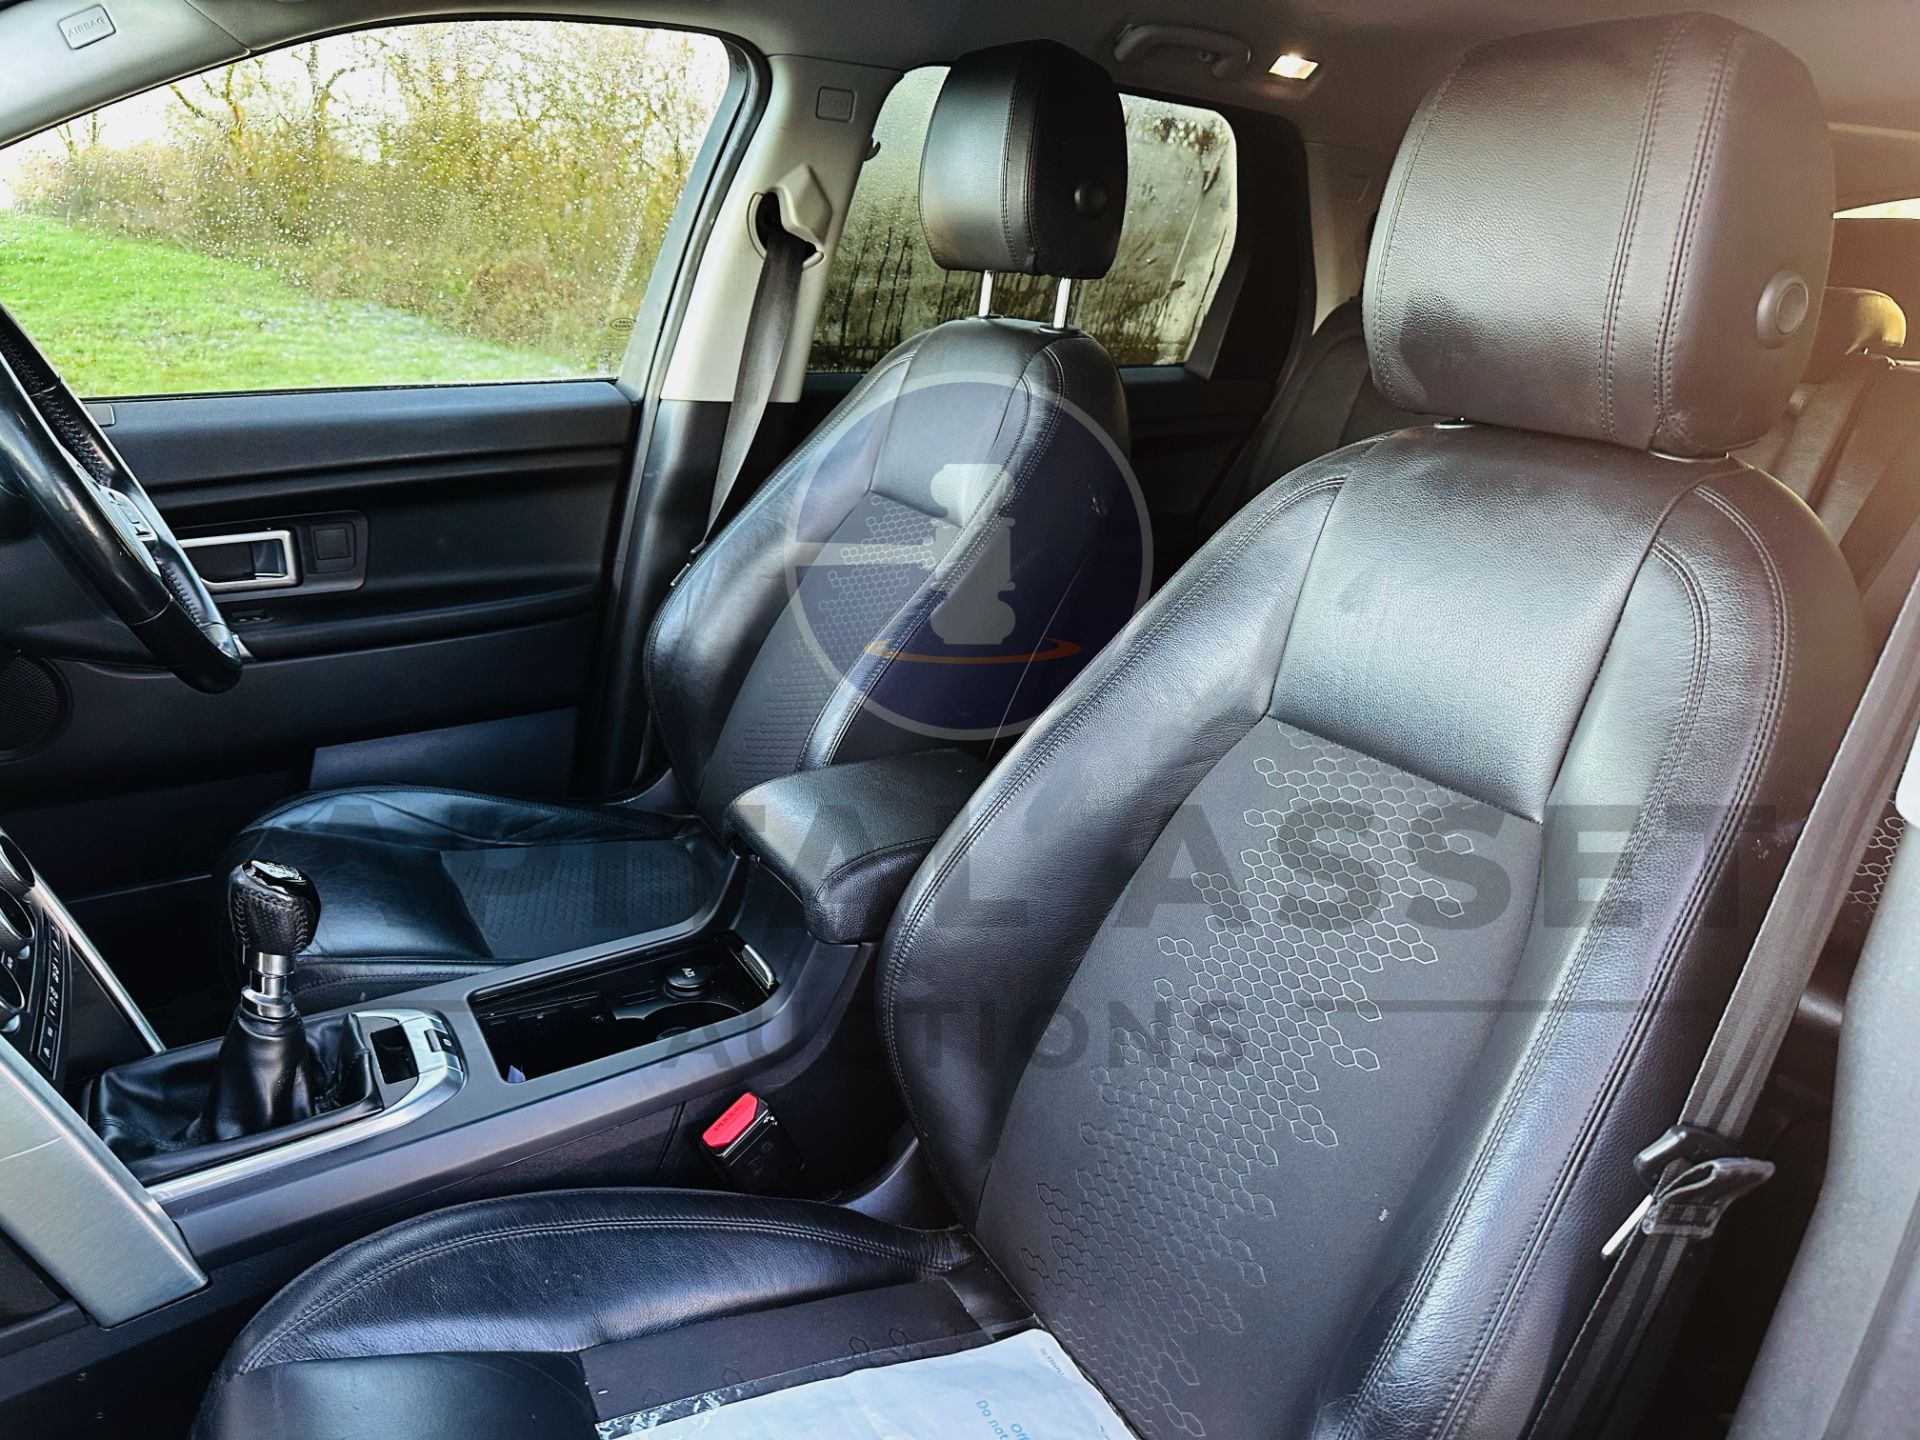 (On Sale) LAND ROVER DISCOVERY SPORT *SE EDITION* (2017 MODEL) - 7 SEATER - AIR CON - EURO 6 - Image 27 of 41